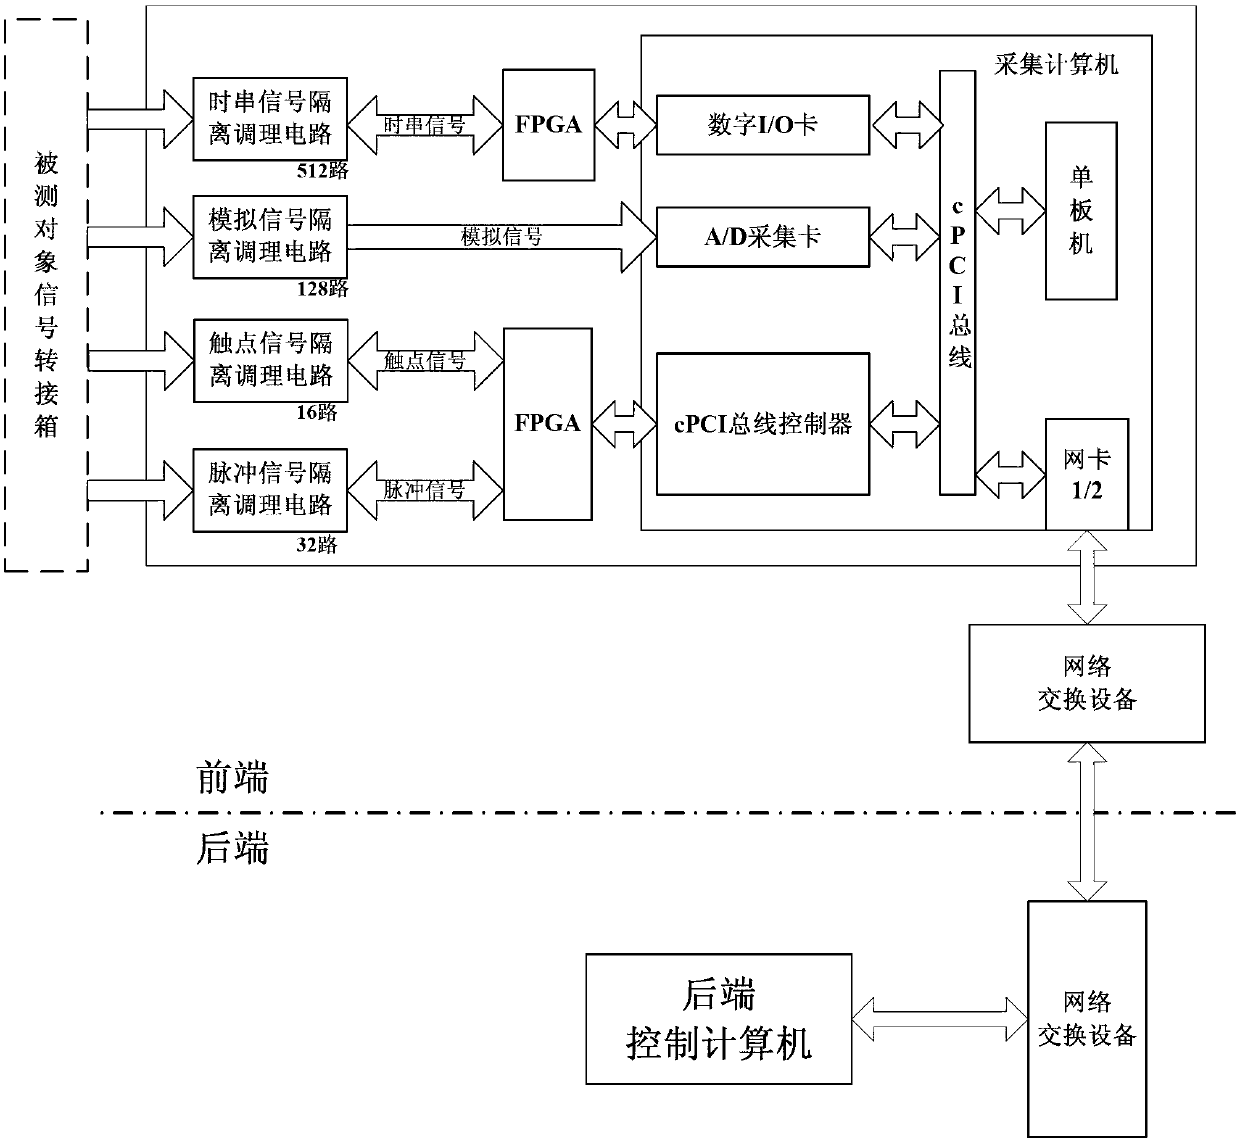 System for acquiring and processing multi-type information based on cPCI bus